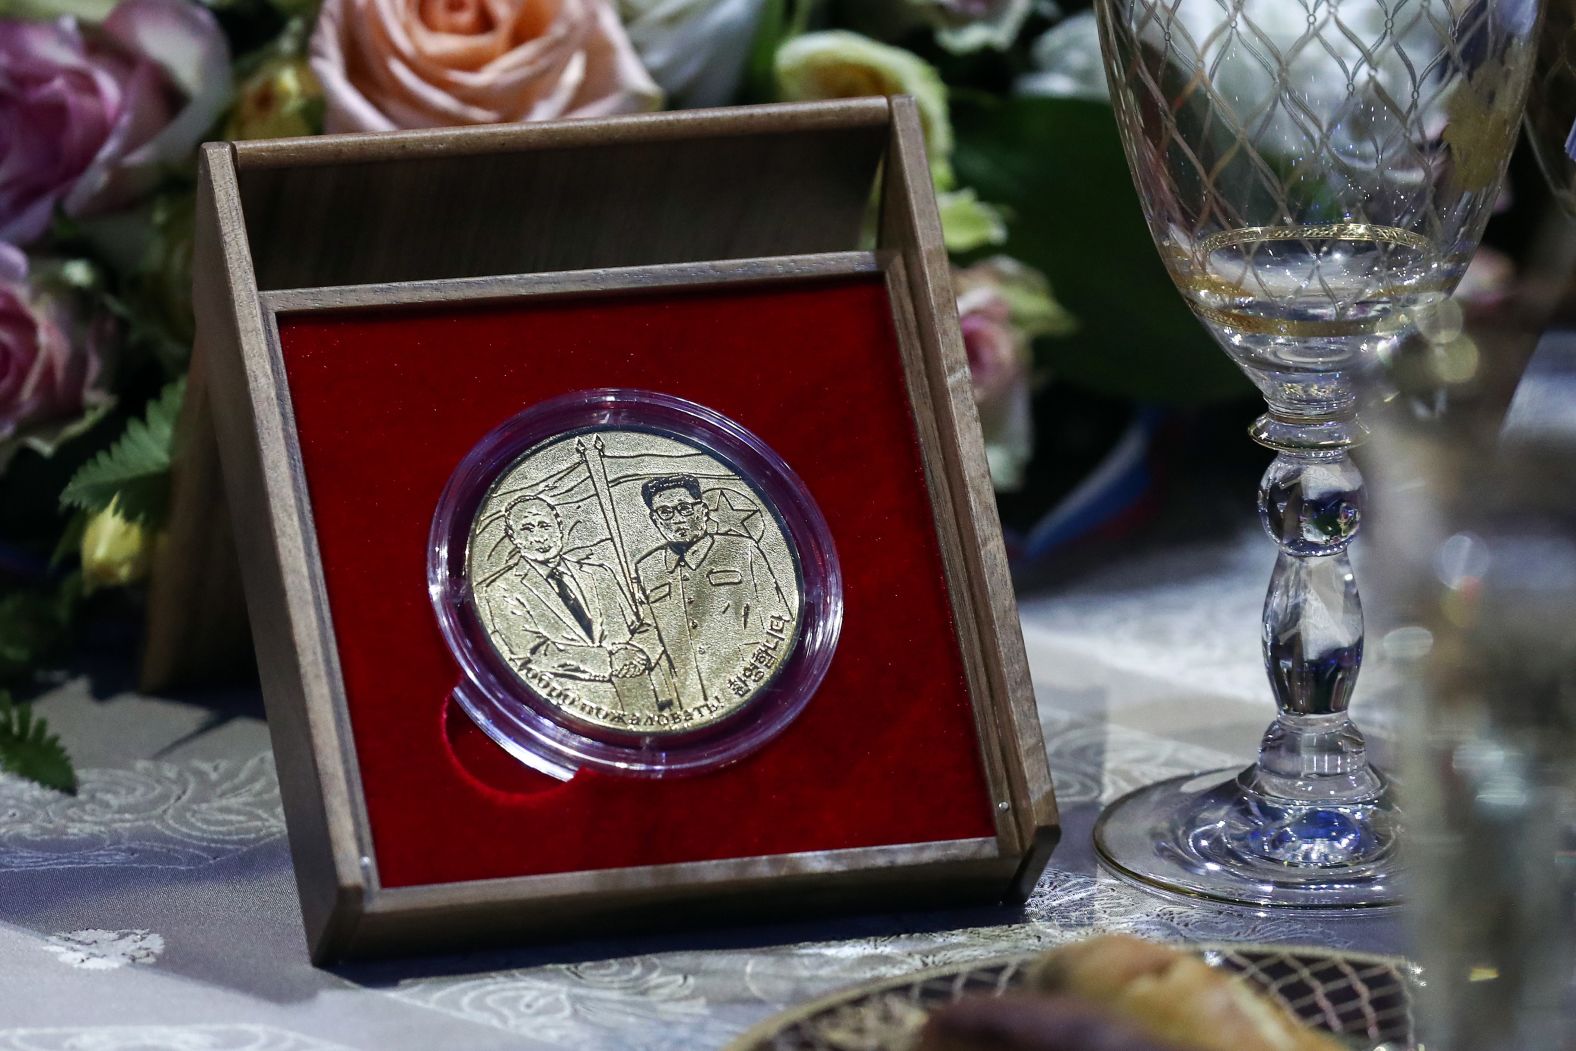 A commemorative medal during a reception on behalf of Russia's President Vladimir Putin following Russian and North Korean talks at the Far Eastern Federal University (FEFU) on Russky Island on Thursday, April 25.